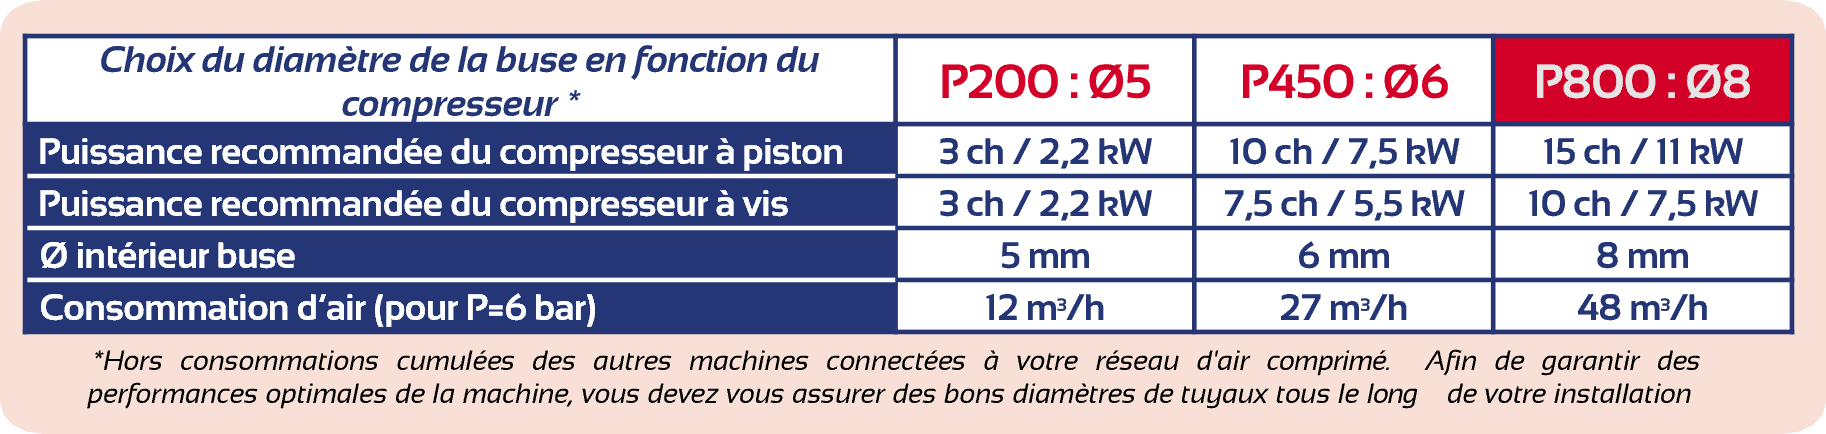 Choix Buses P800.png